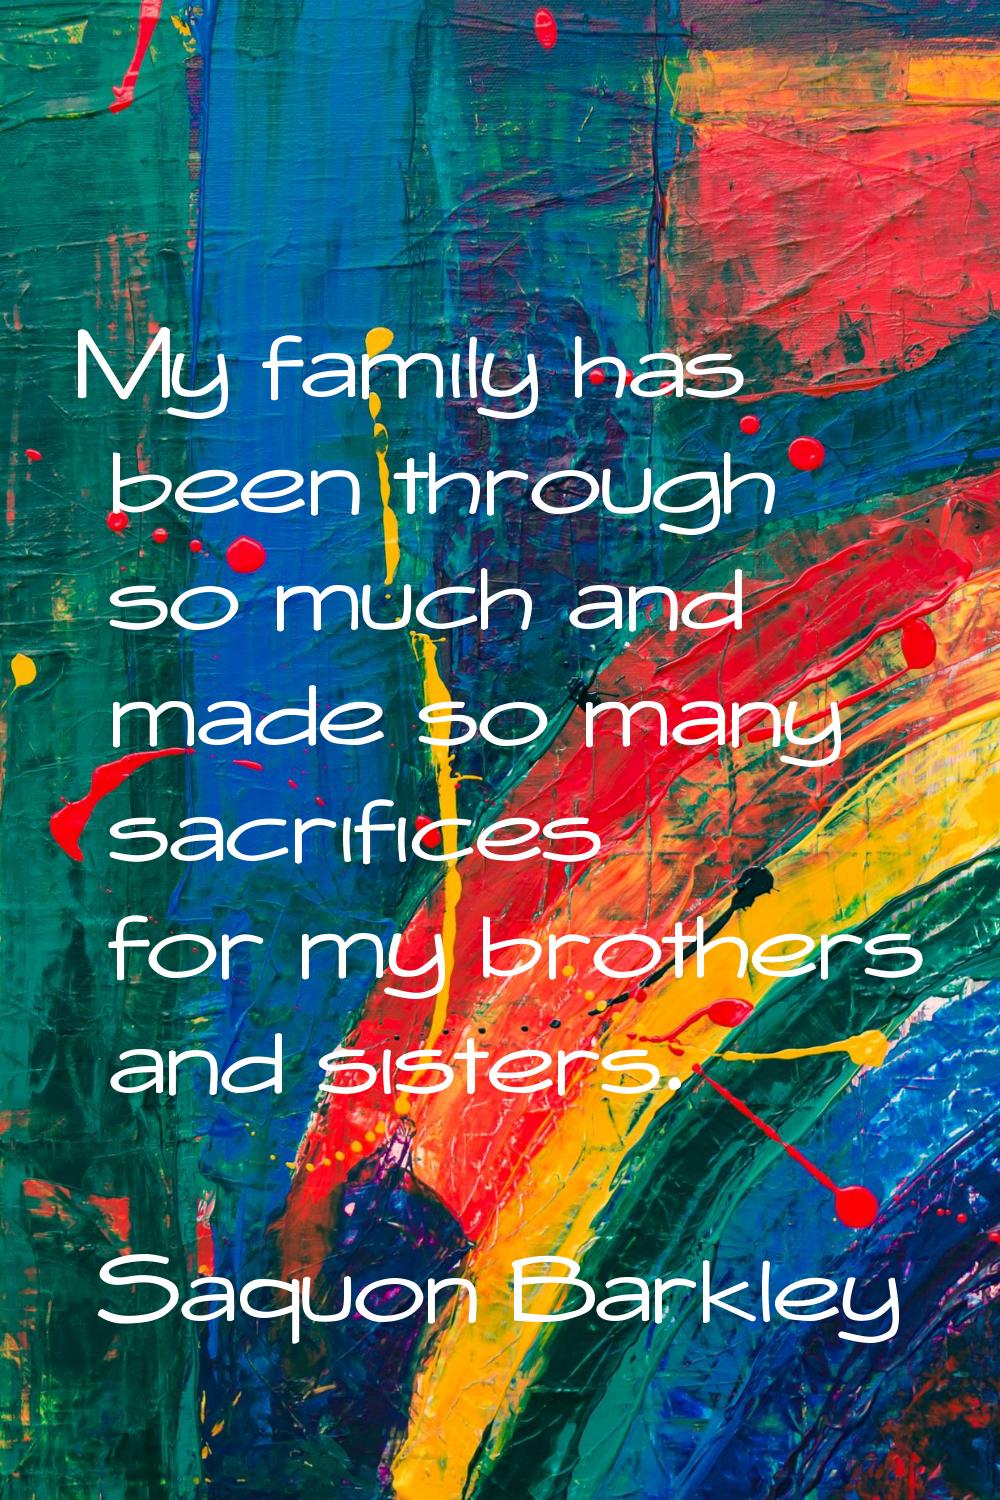 My family has been through so much and made so many sacrifices for my brothers and sisters.